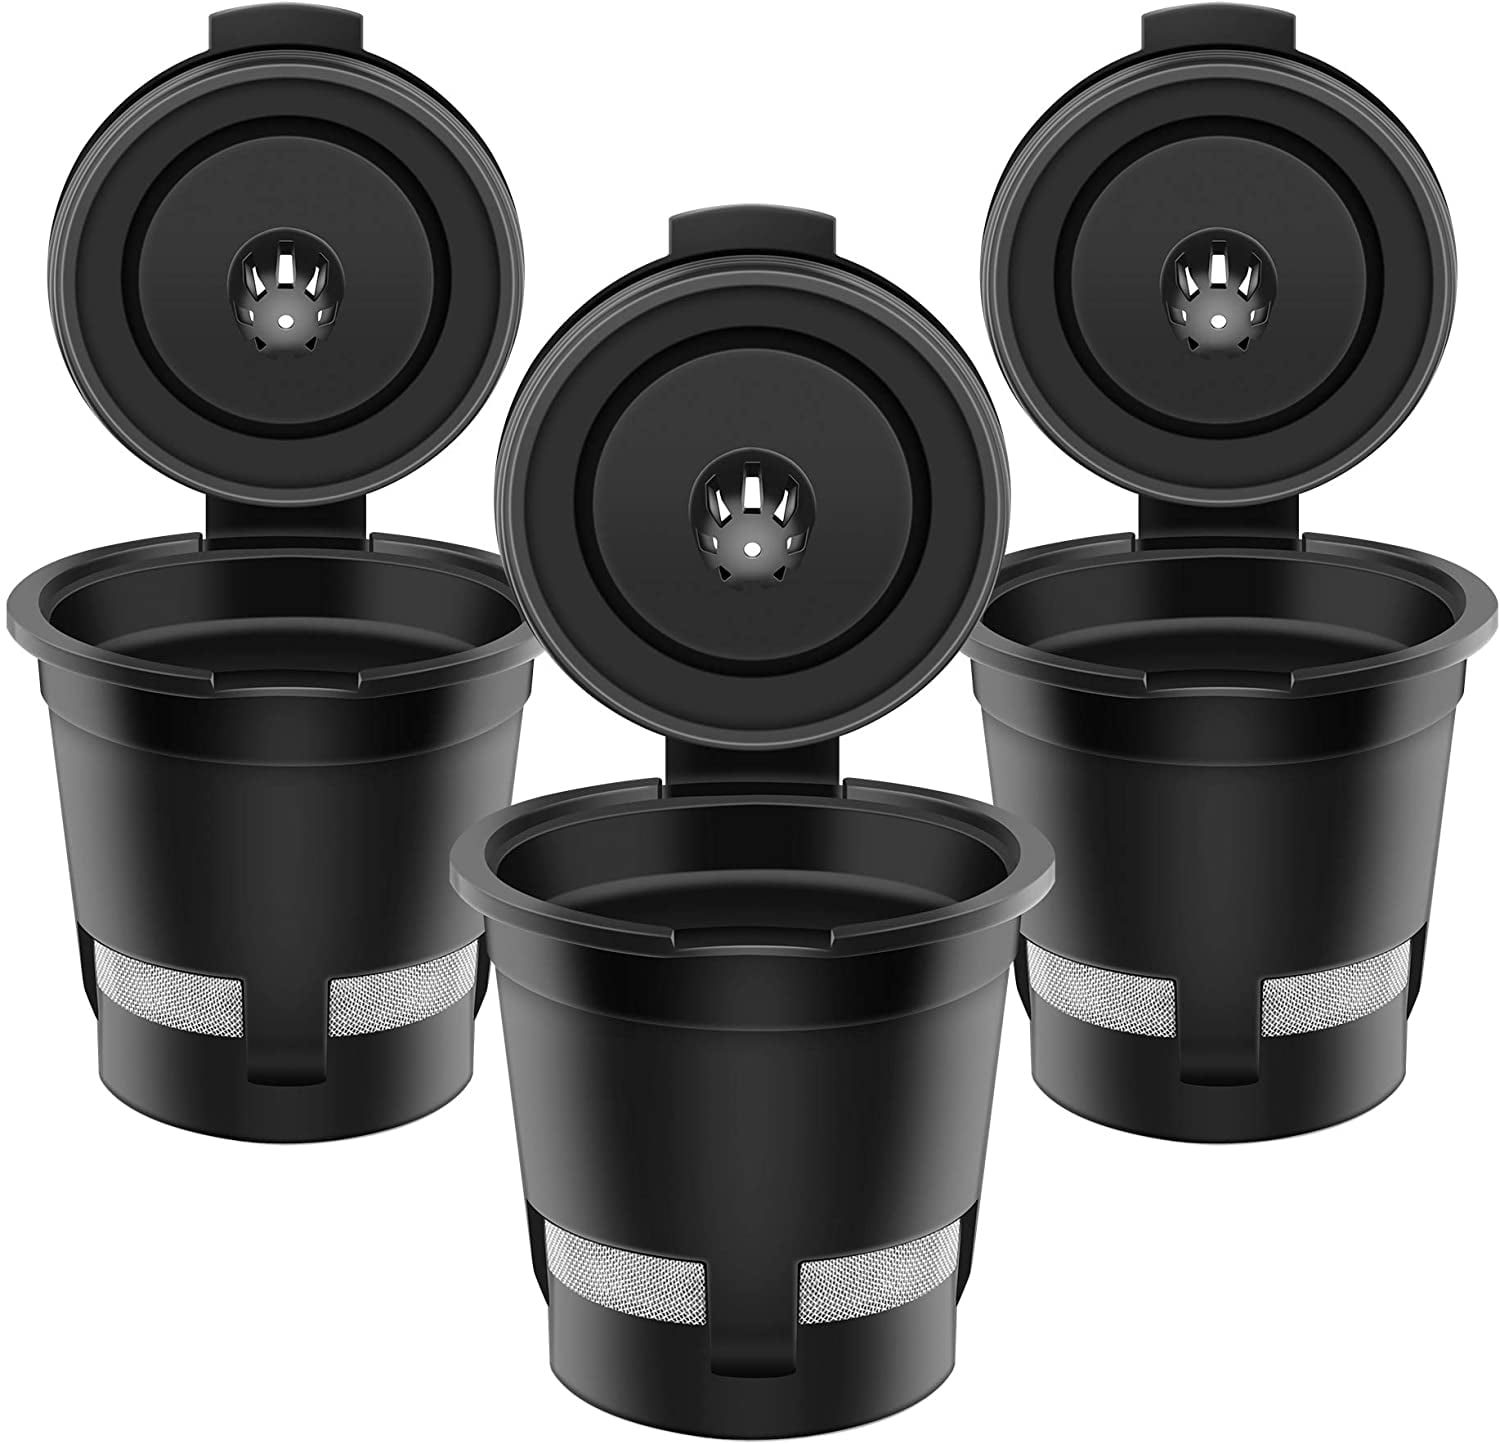  LVNASST 6-Pack Reusable K Cups for Keurig 1.0 & 2.0 Brewers K-Mini  K-Express Single Serve K-Cup Coffee Maker, Universal K Cup Refillable  Filters 6 Vibrant Colors for Brewing, BPA Free: Home